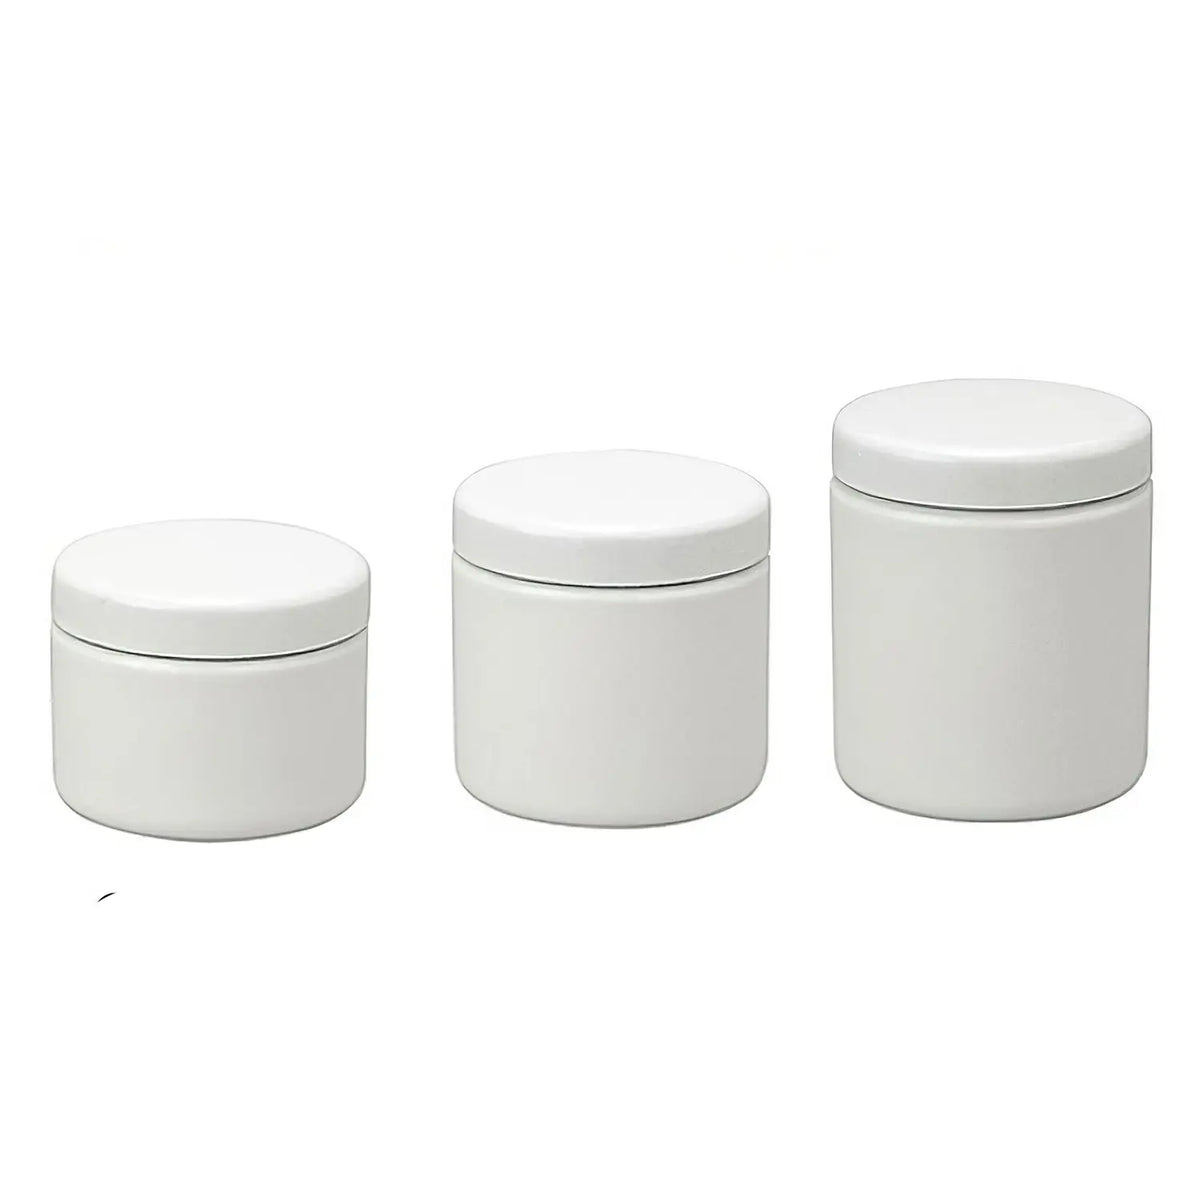 1250 Pack] 4 oz Portion Cups with Lids- Small Condiment Containers